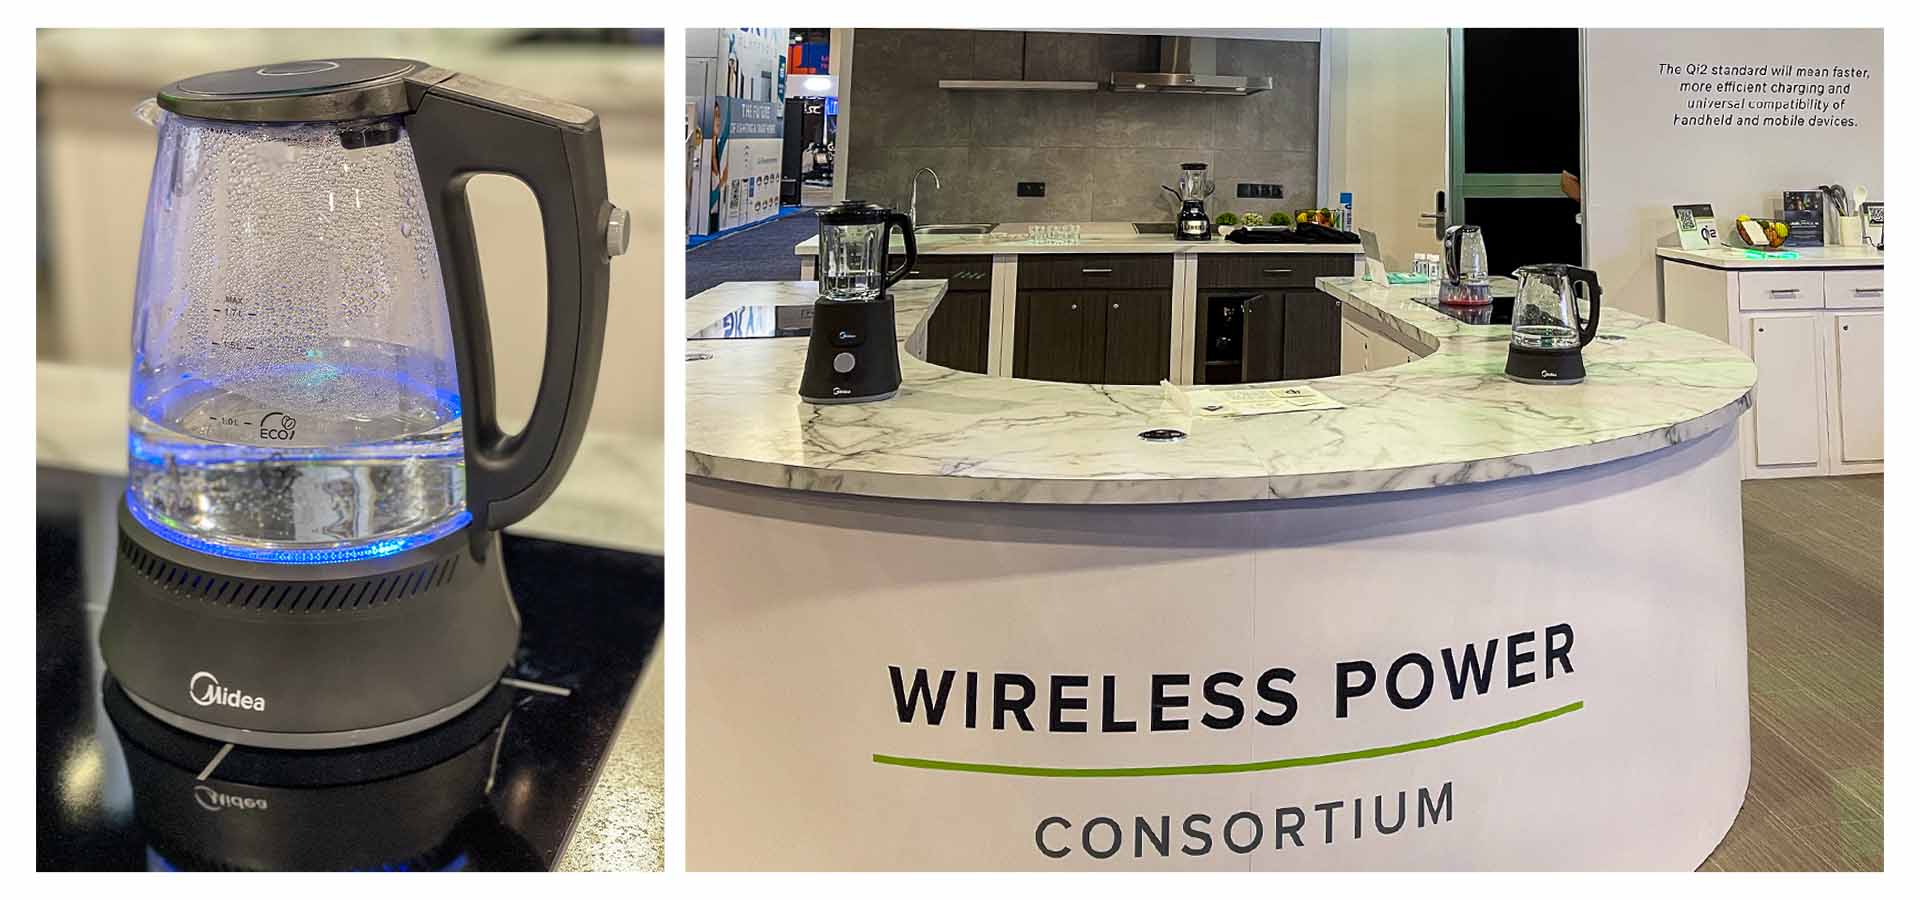 MIDEA SHOWCASES INNOVATION AND CONNECTION WITH THE WIRELESS POWER